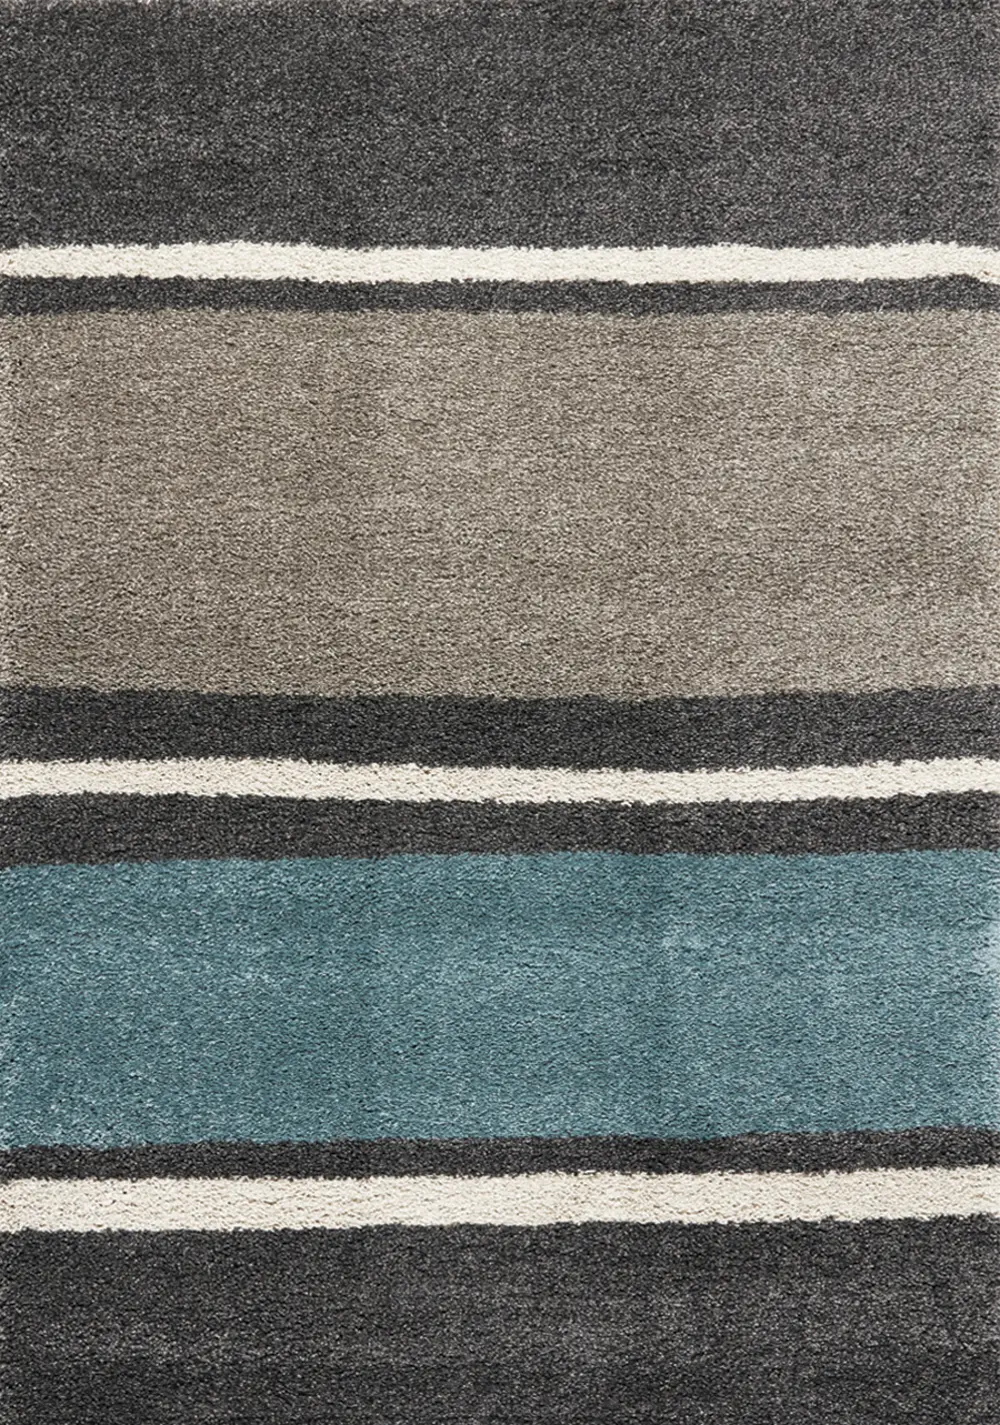 5 x 8 Medium Striped Gray, Taupe and Teal Blue Rug - Maroq-1